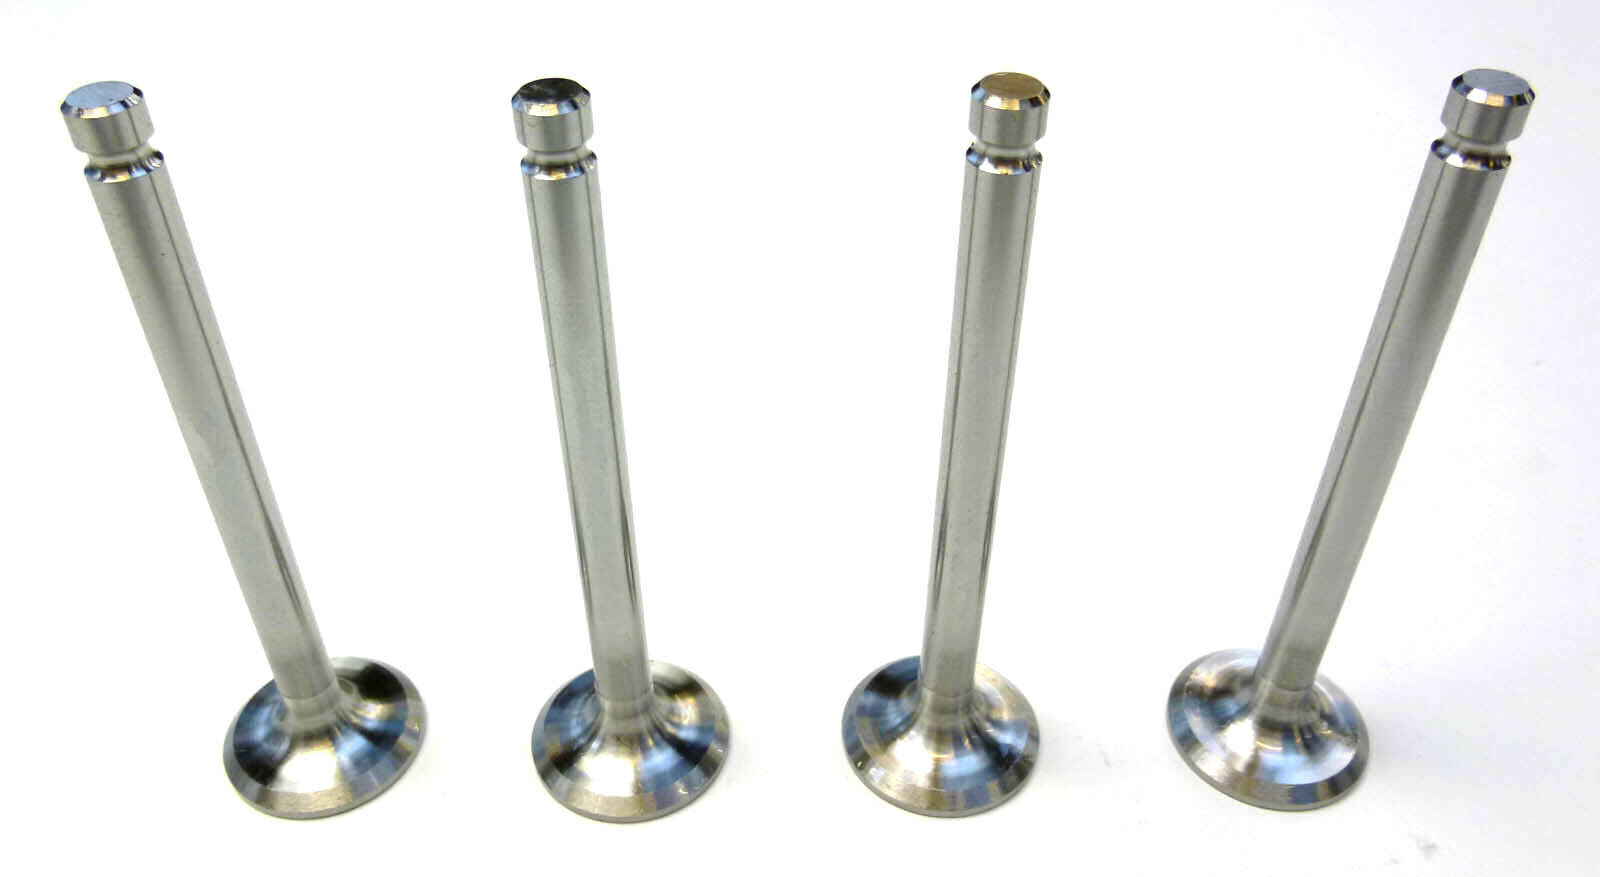 RELIANT 850 STAINLESS STEEL EXHAUST VALVE SET (of 4) - PEV620S